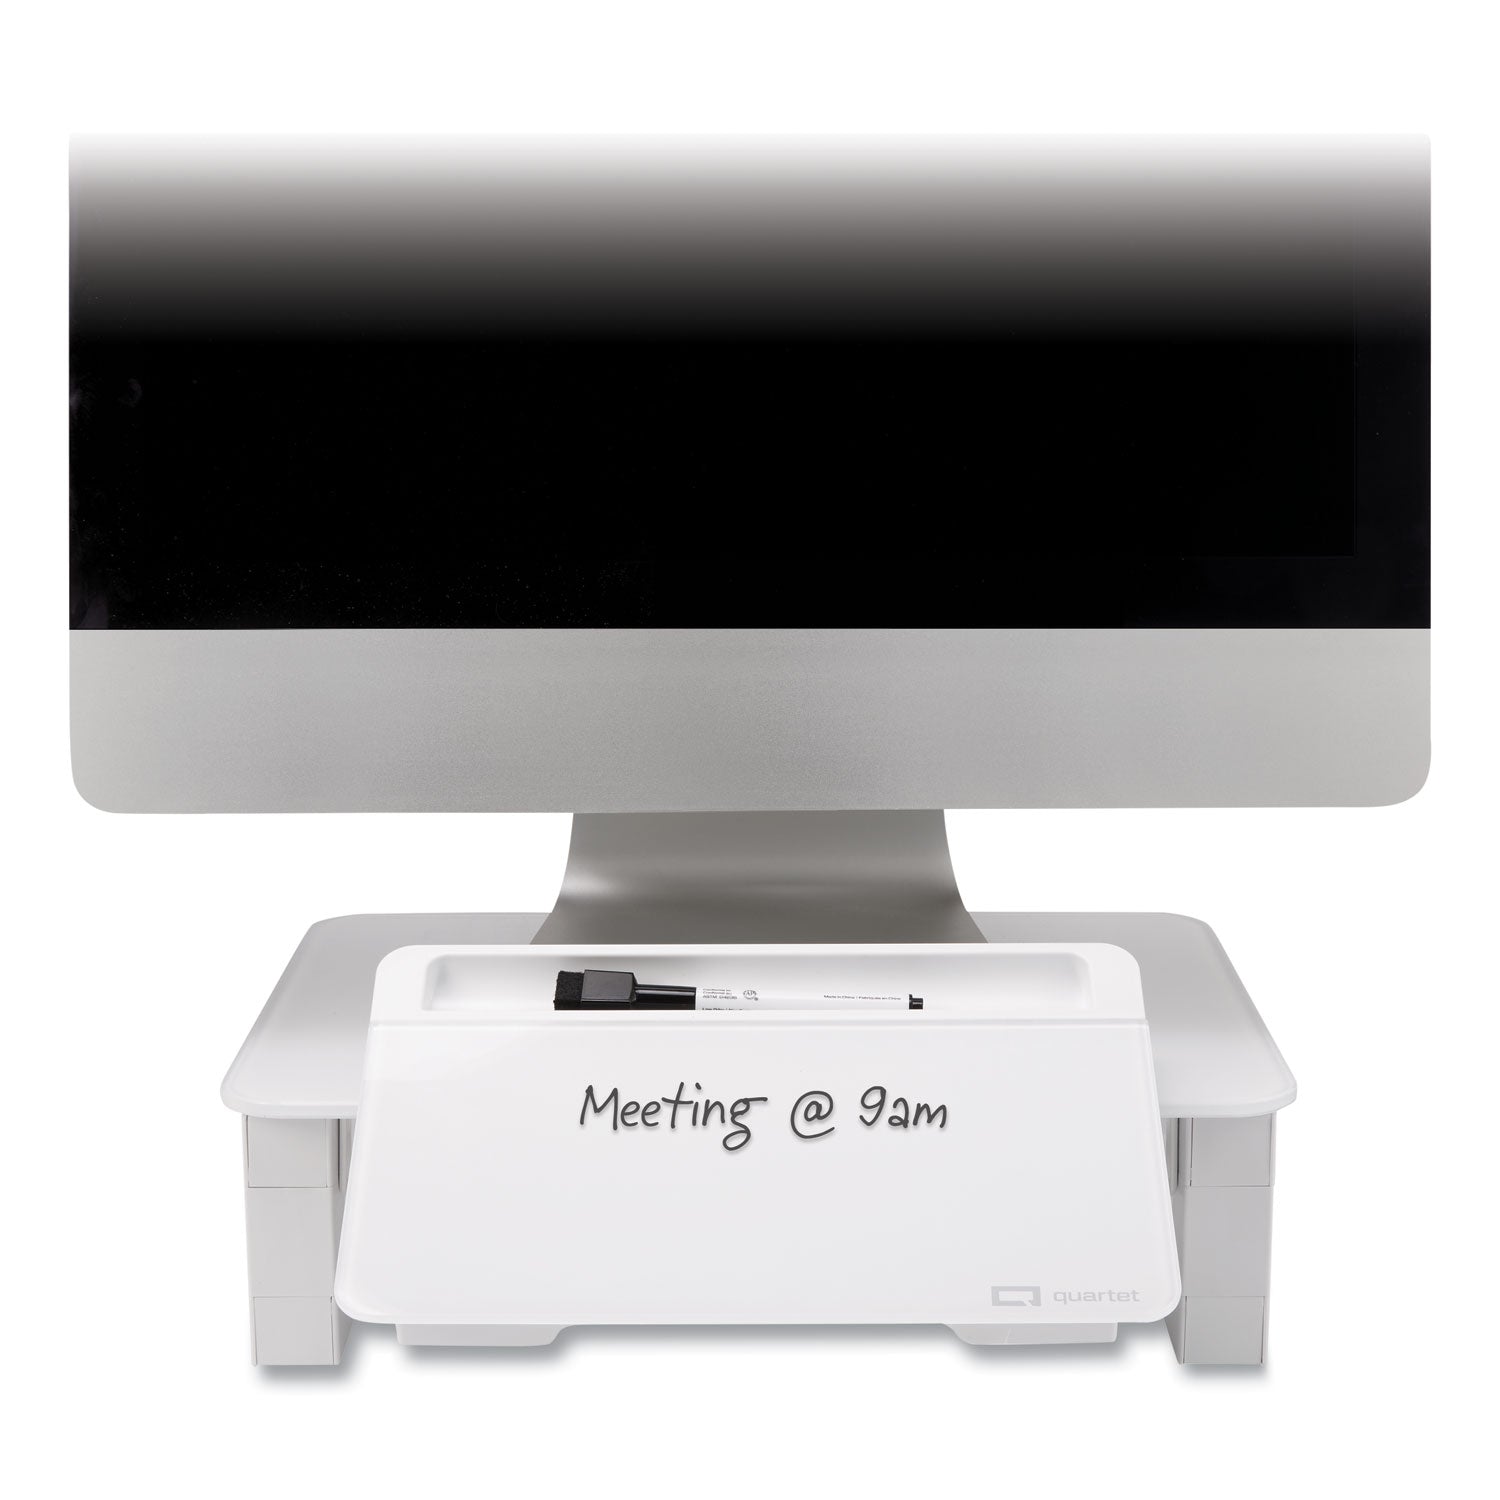 adjustable-height-desktop-glass-monitor-riser-with-dry-erase-board-14-x-1025-x-25-to-525-white-supports-100-lb_qrtq090gmrw01 - 5